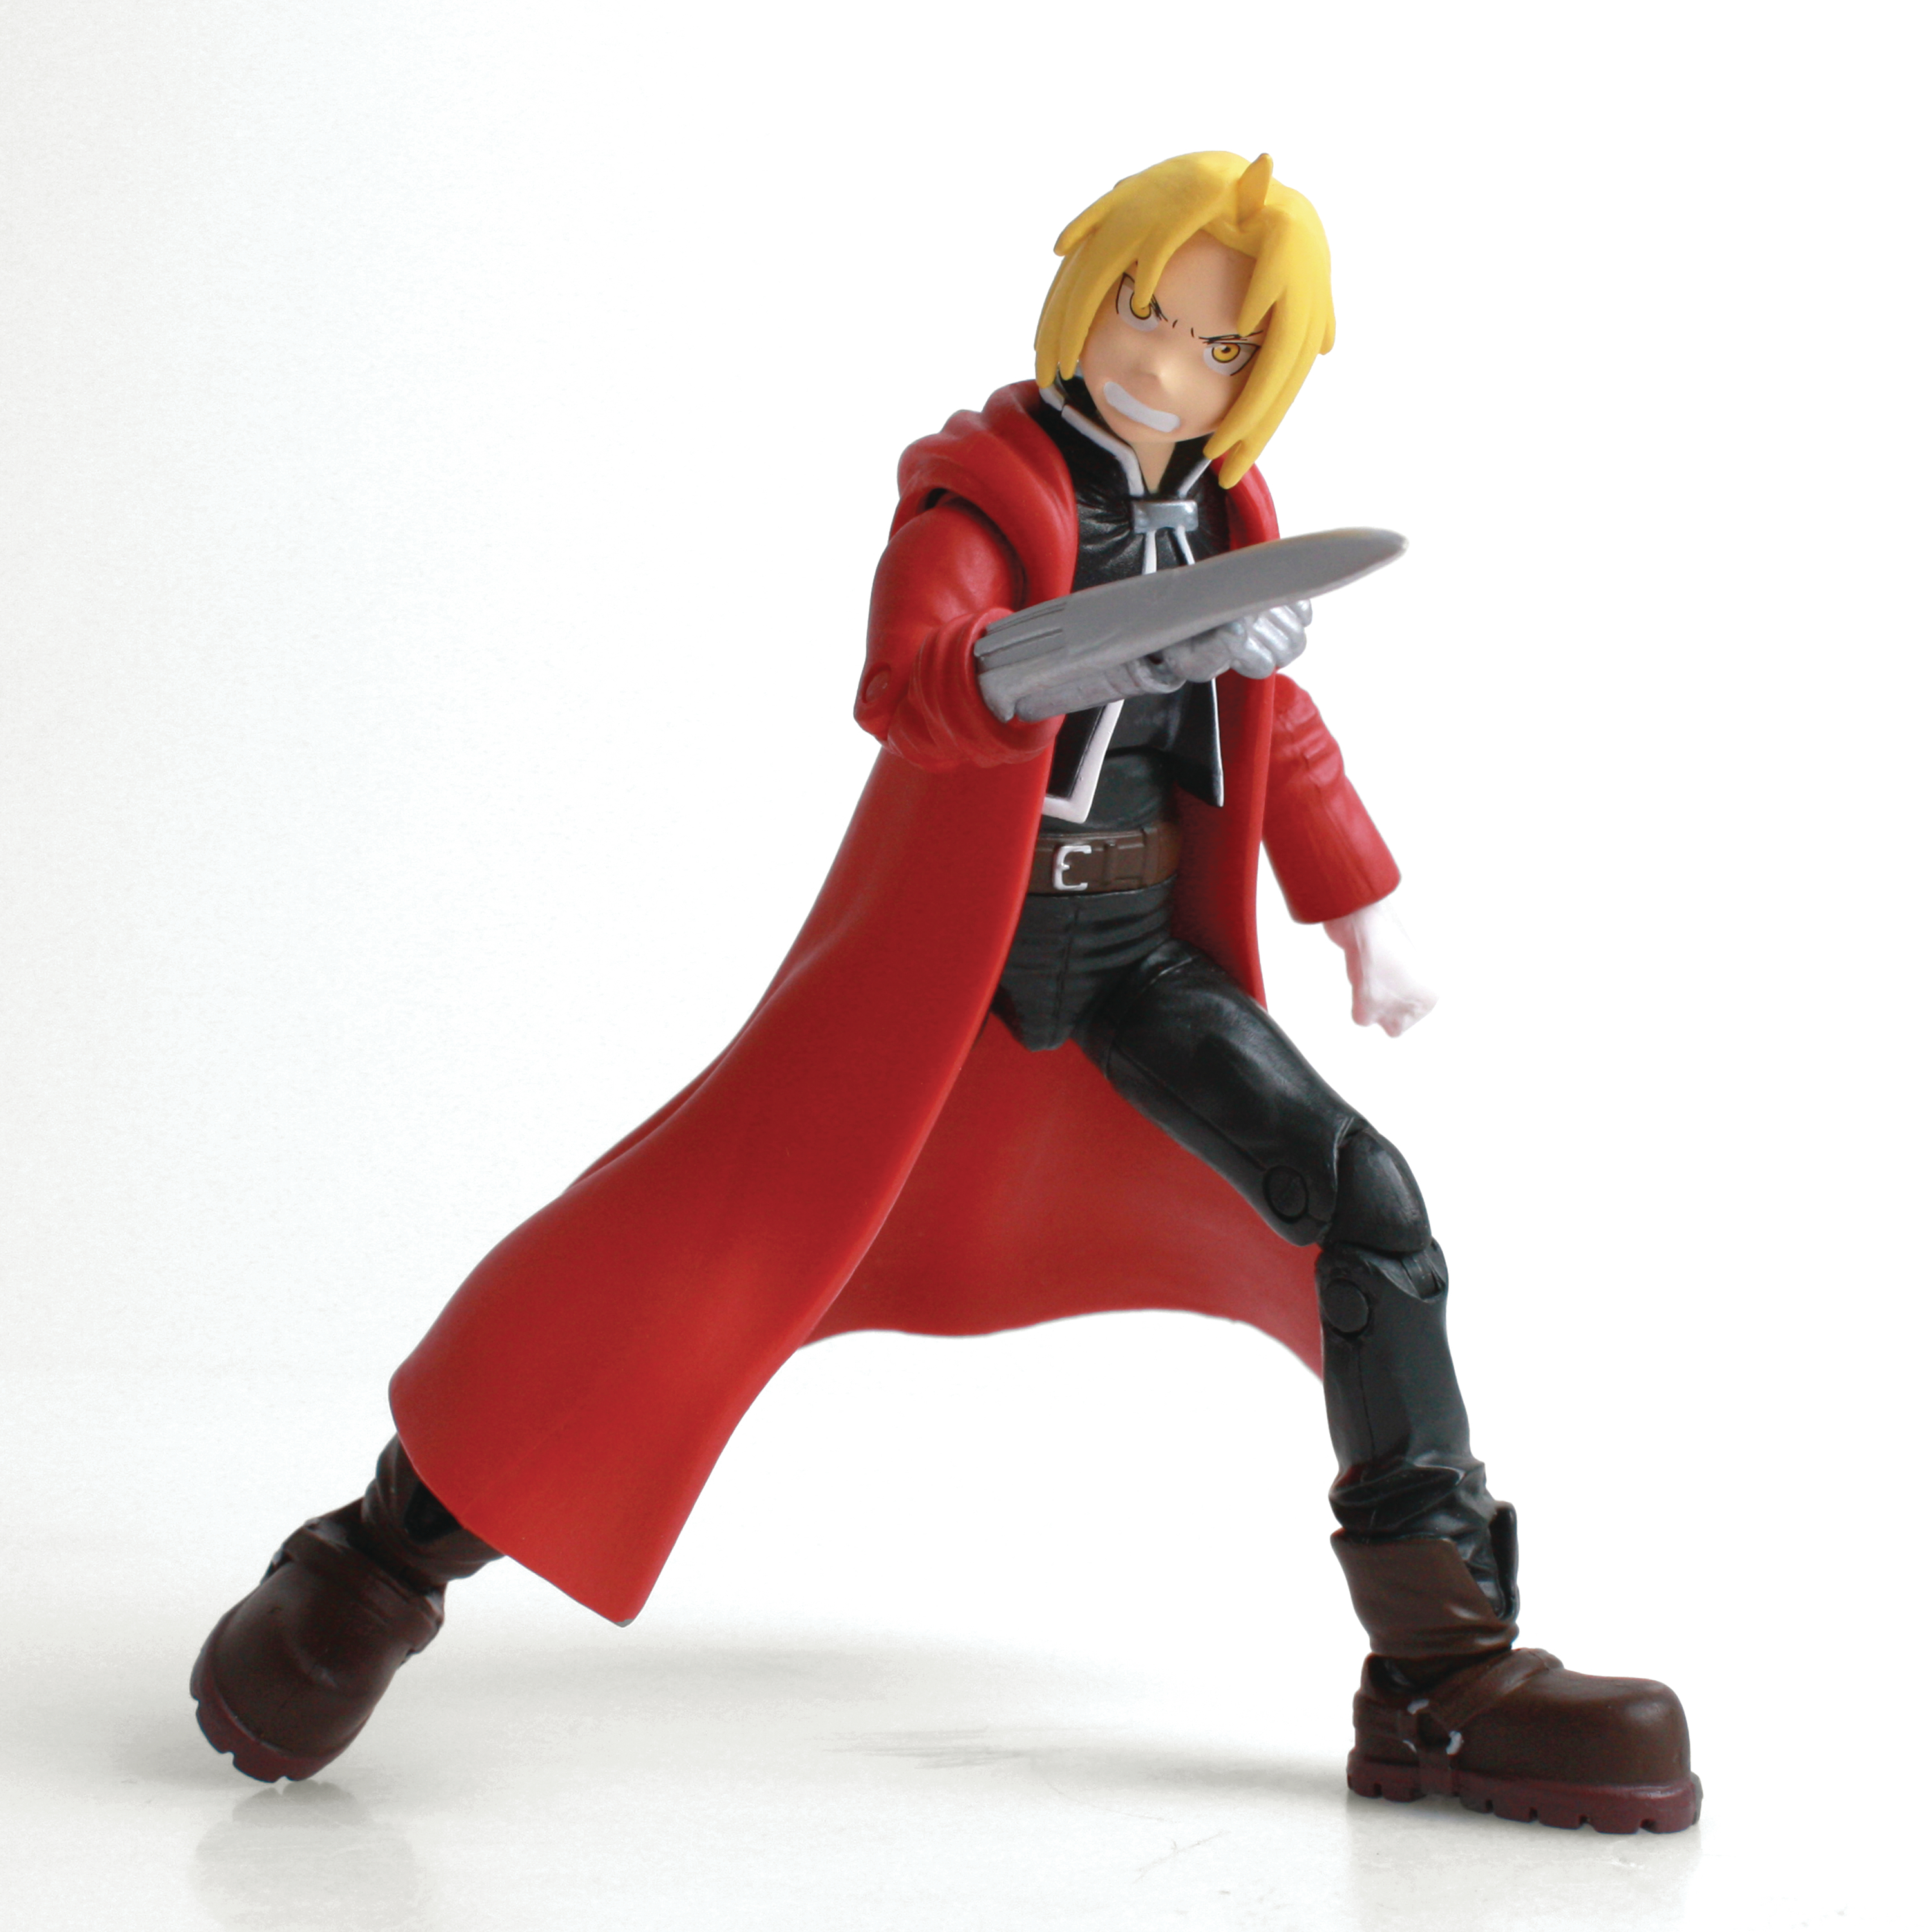 Fullmetal Alchemist BST AXN Edward and Alphonse Elric Figures Loyal Subjects for sale online 